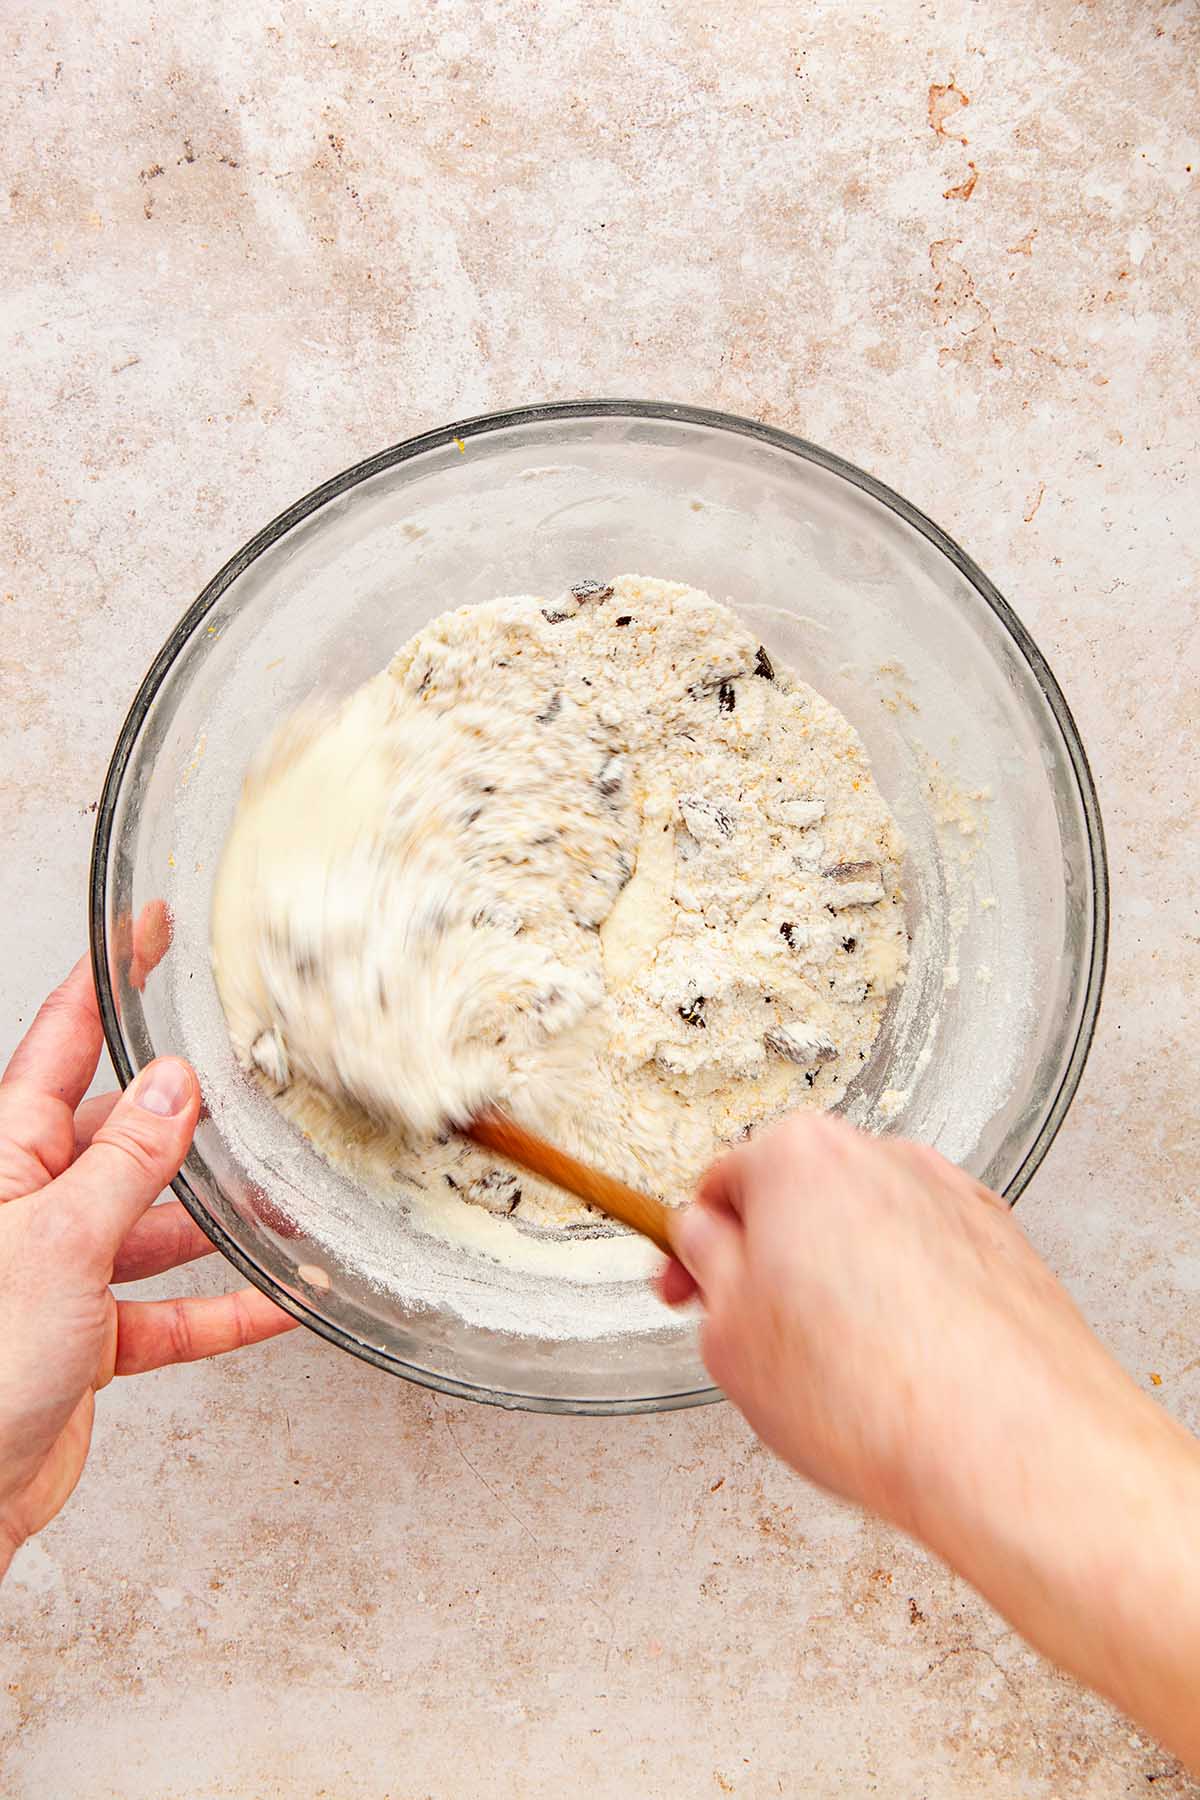 A hand mixing dry and wet dough ingredients with a wooden spoon.